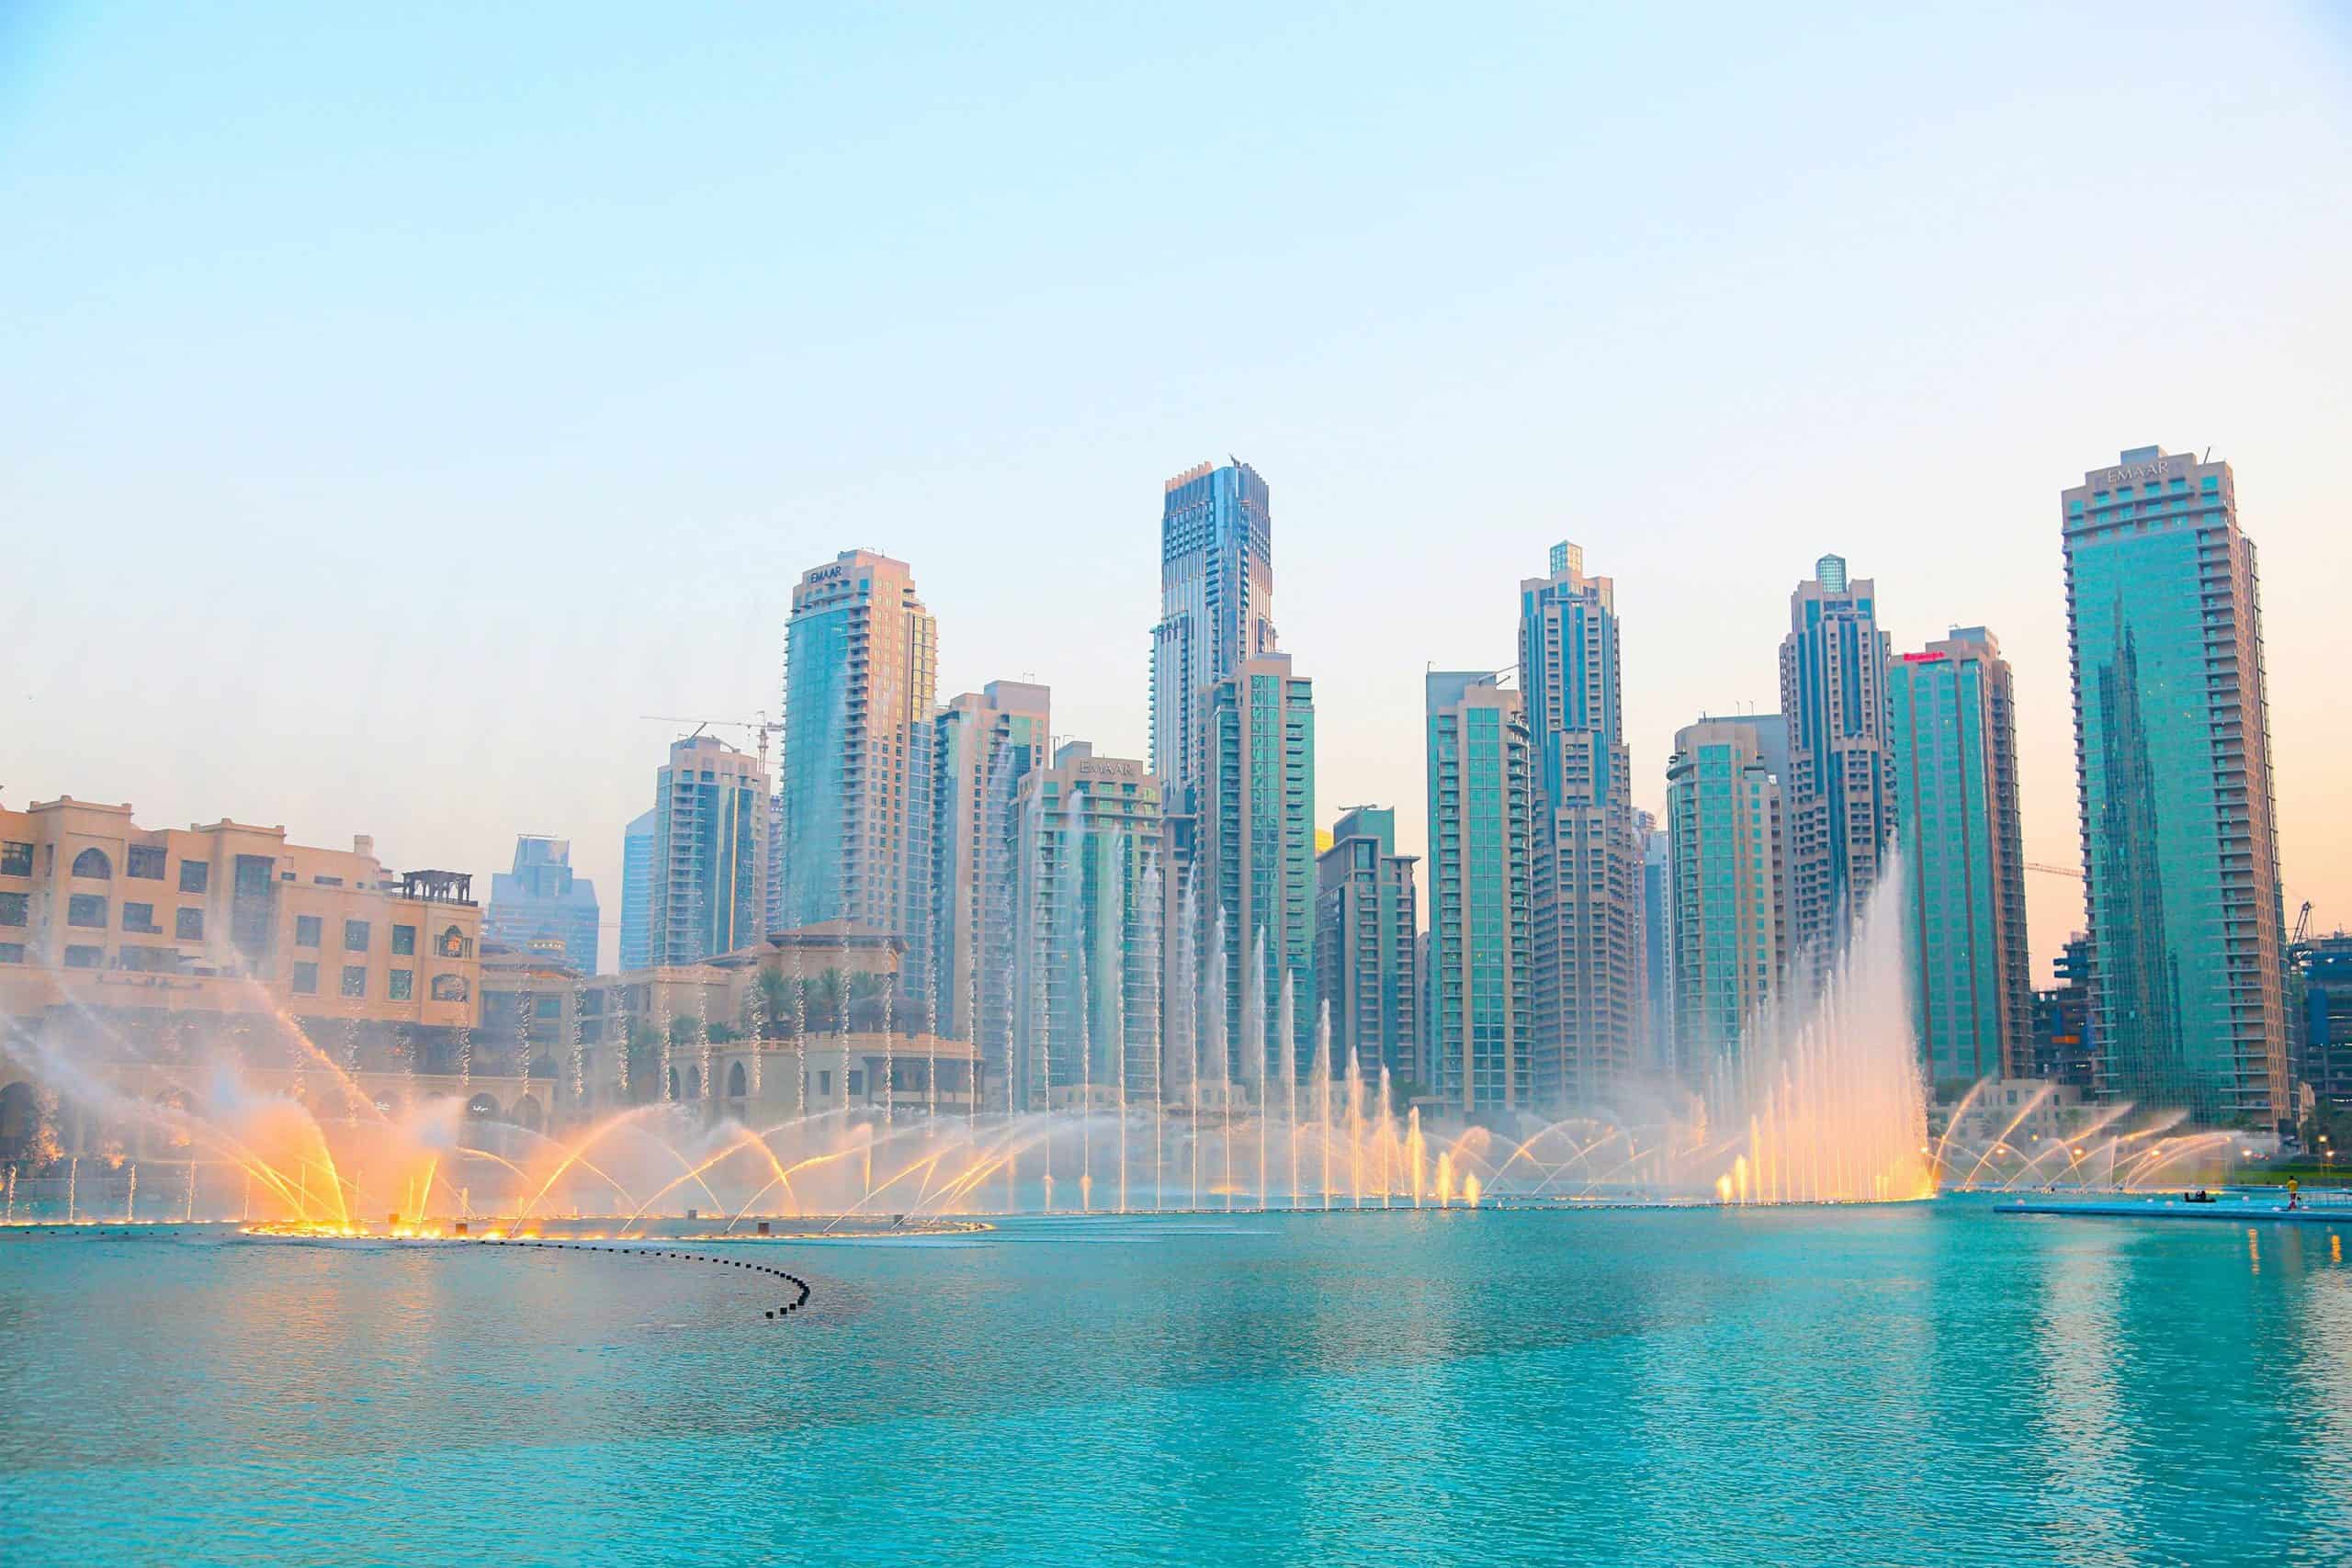 fountains in a beautiful pool with highrise buildings behind